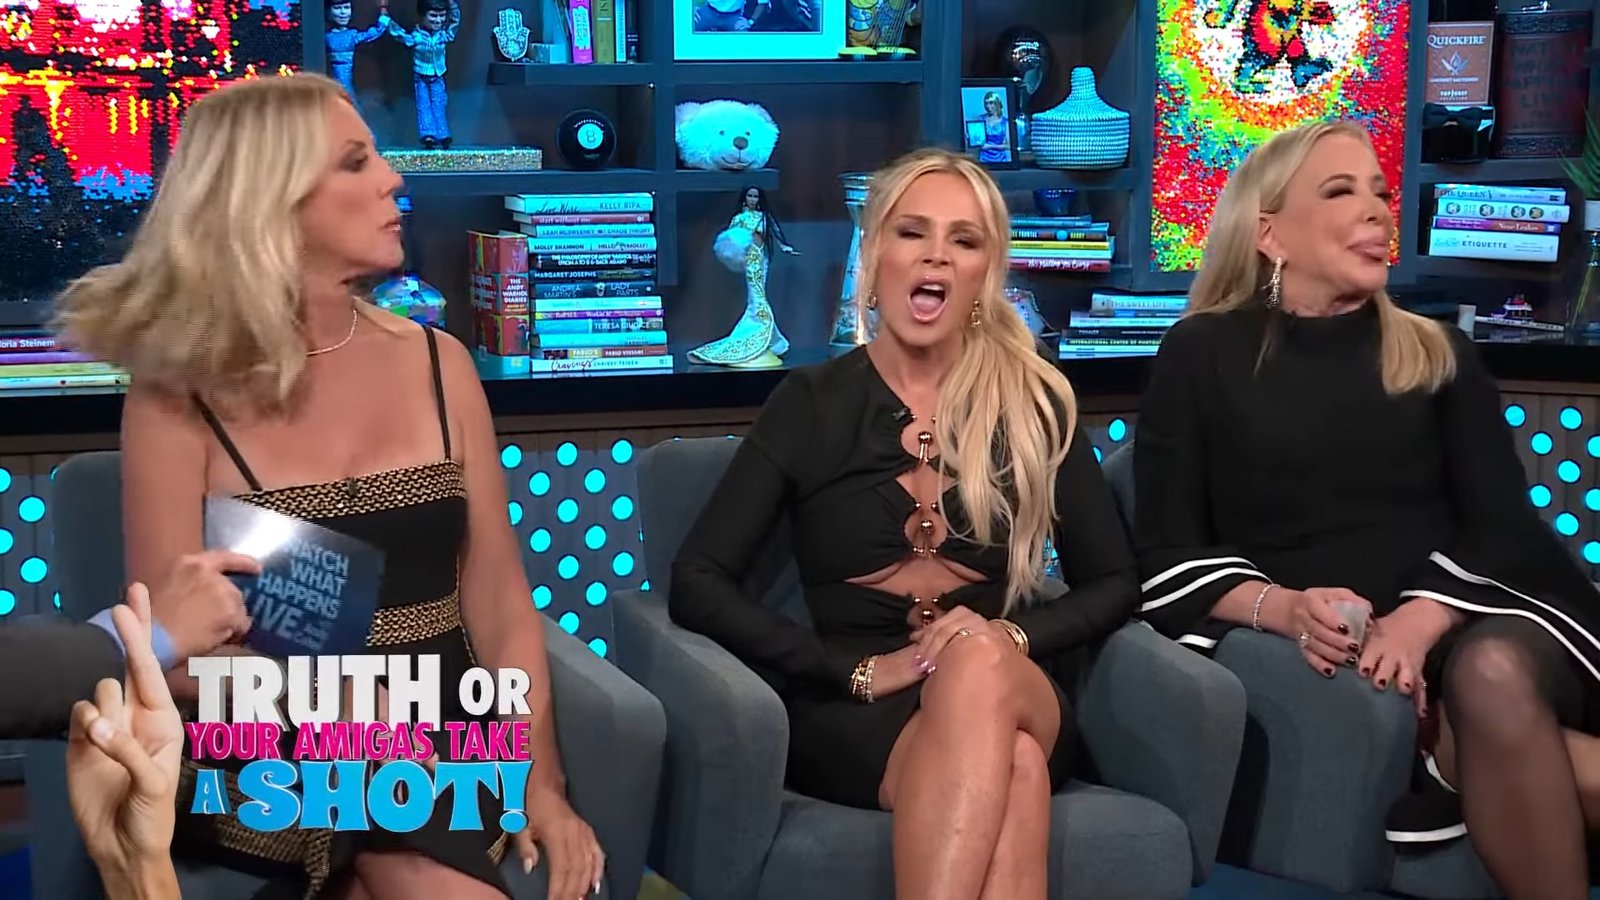 Despite Gunvalson's stern comments about Mellencamp, Tamra Judge and Shannon Beador only had good things to say about the "RHOBH" alum.